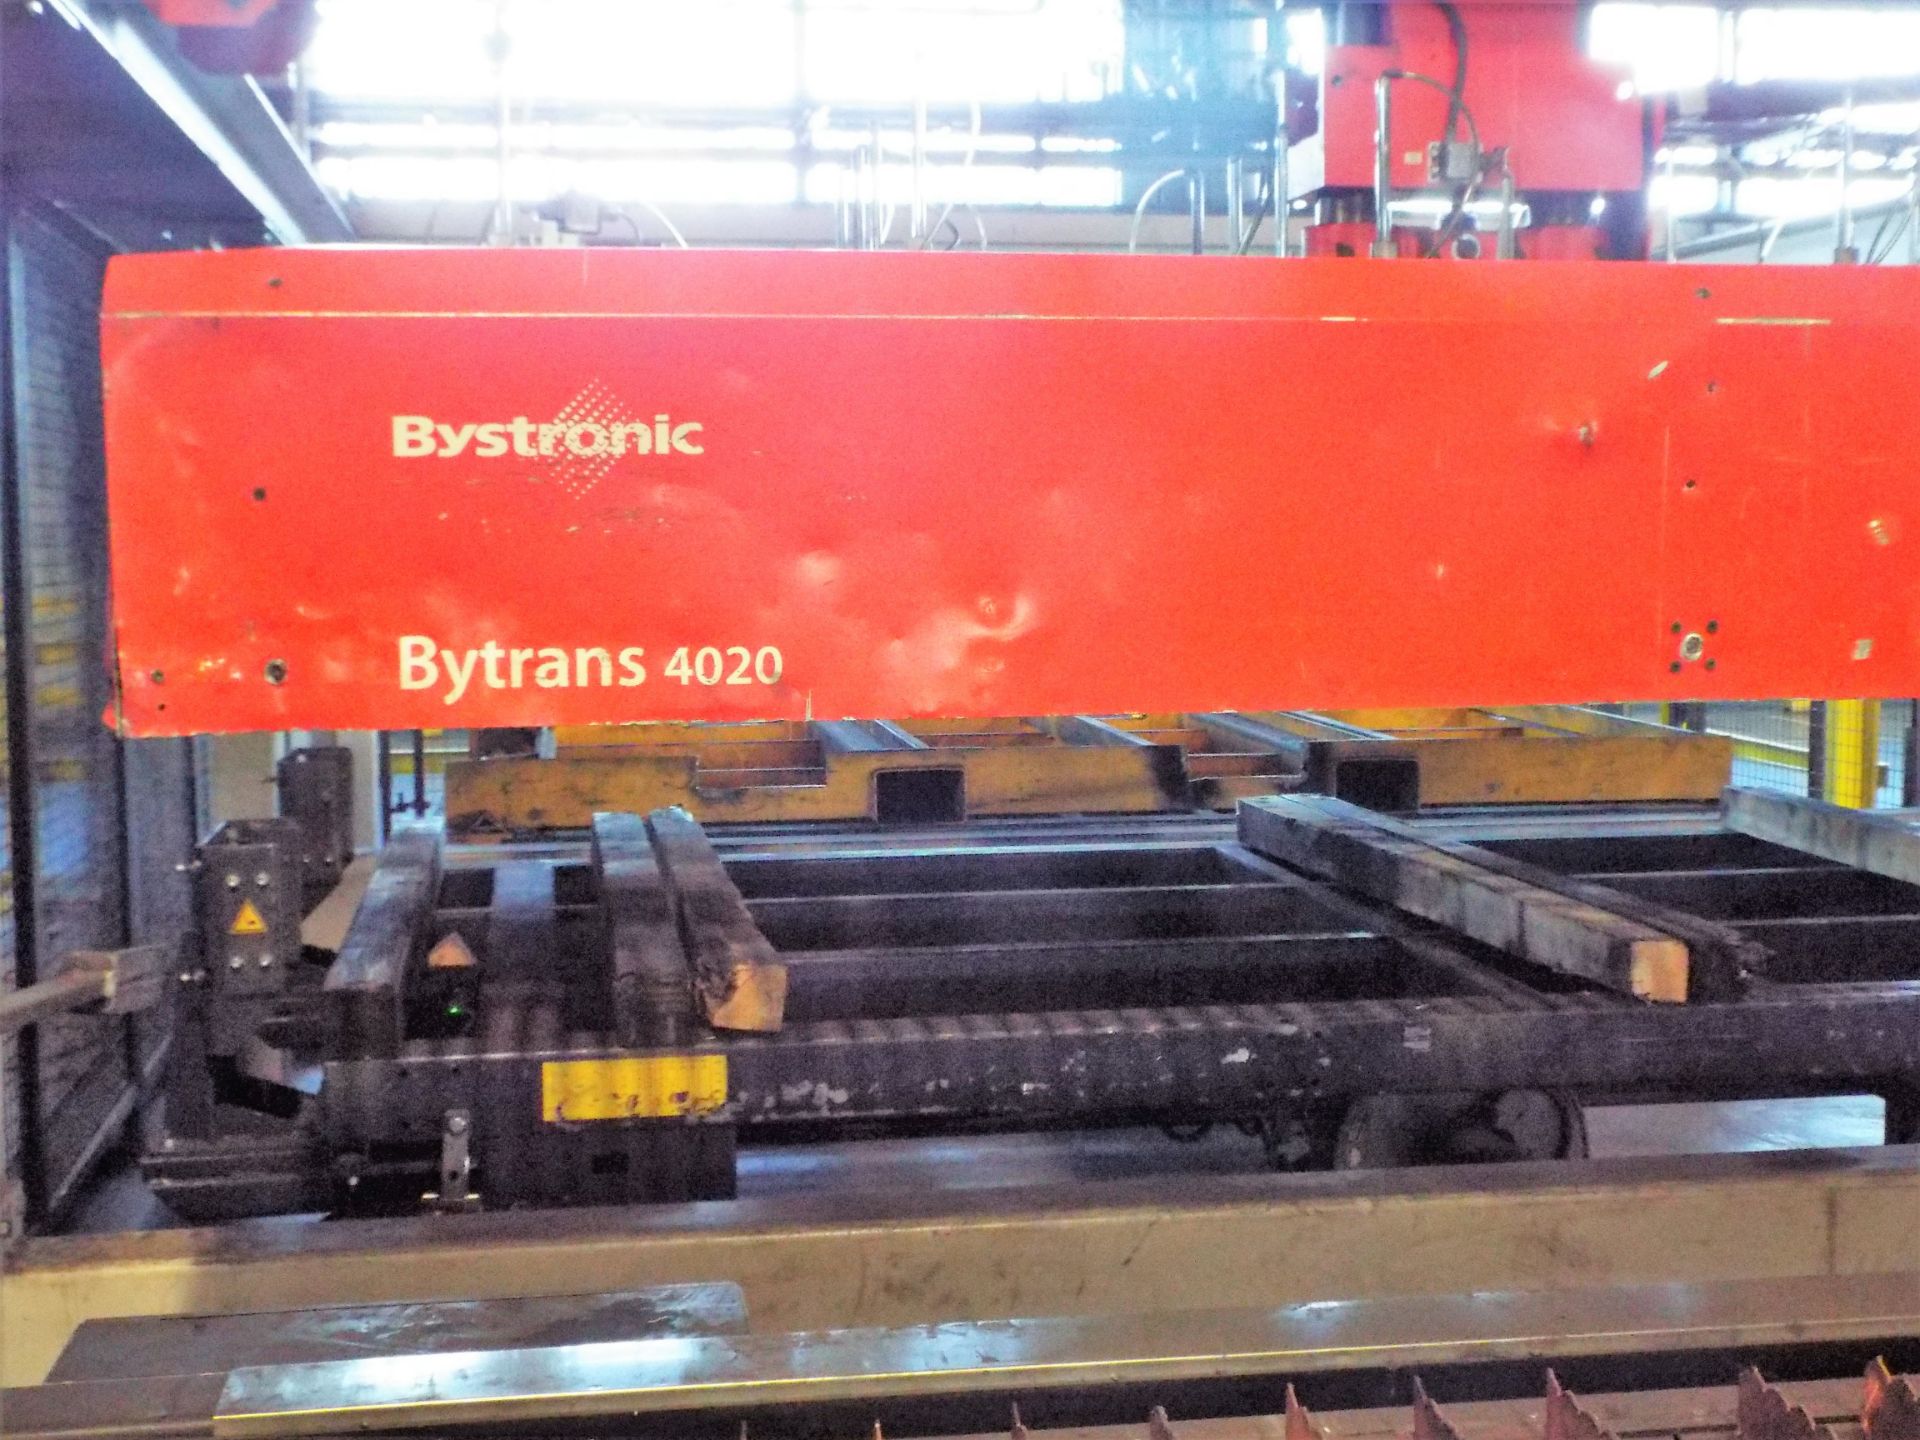 Bystronic 4020/Bylaser 6000/BytransCross 4020 - Laser Cutting Cell cw Support Equipment. - Image 11 of 50